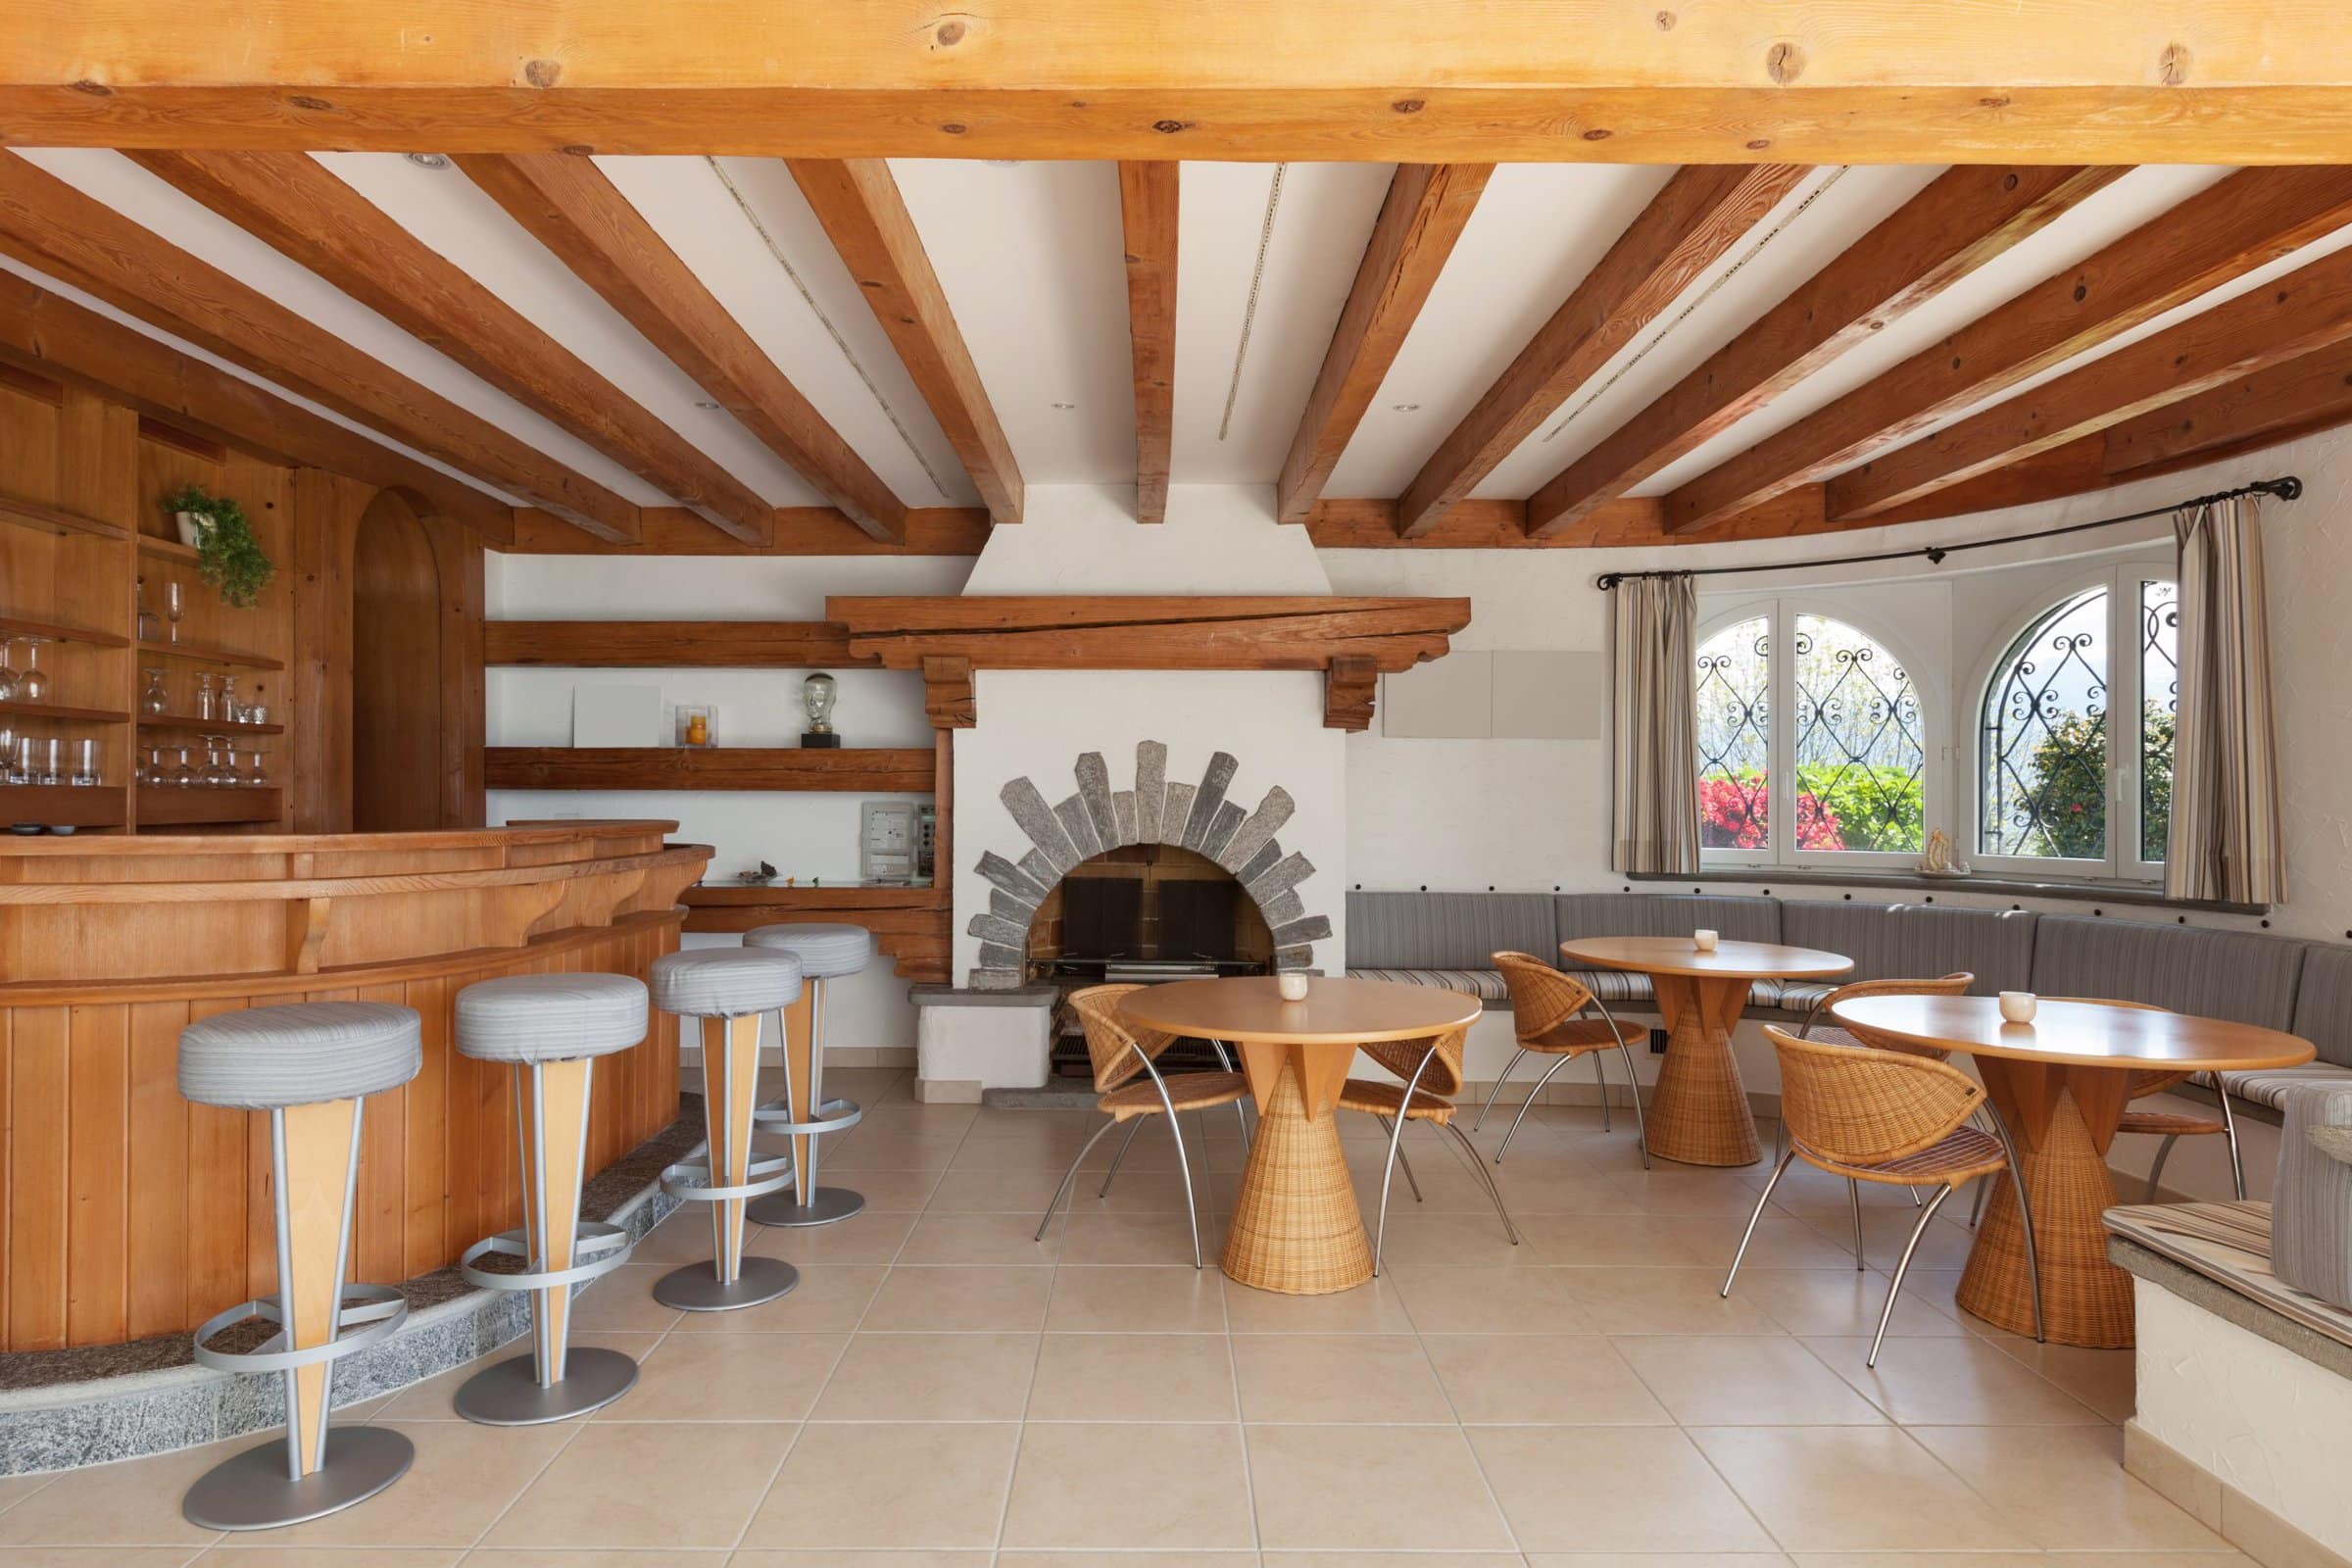  Go for Medium Wood Ceiling Beams for a Warm Traditional Look scaled